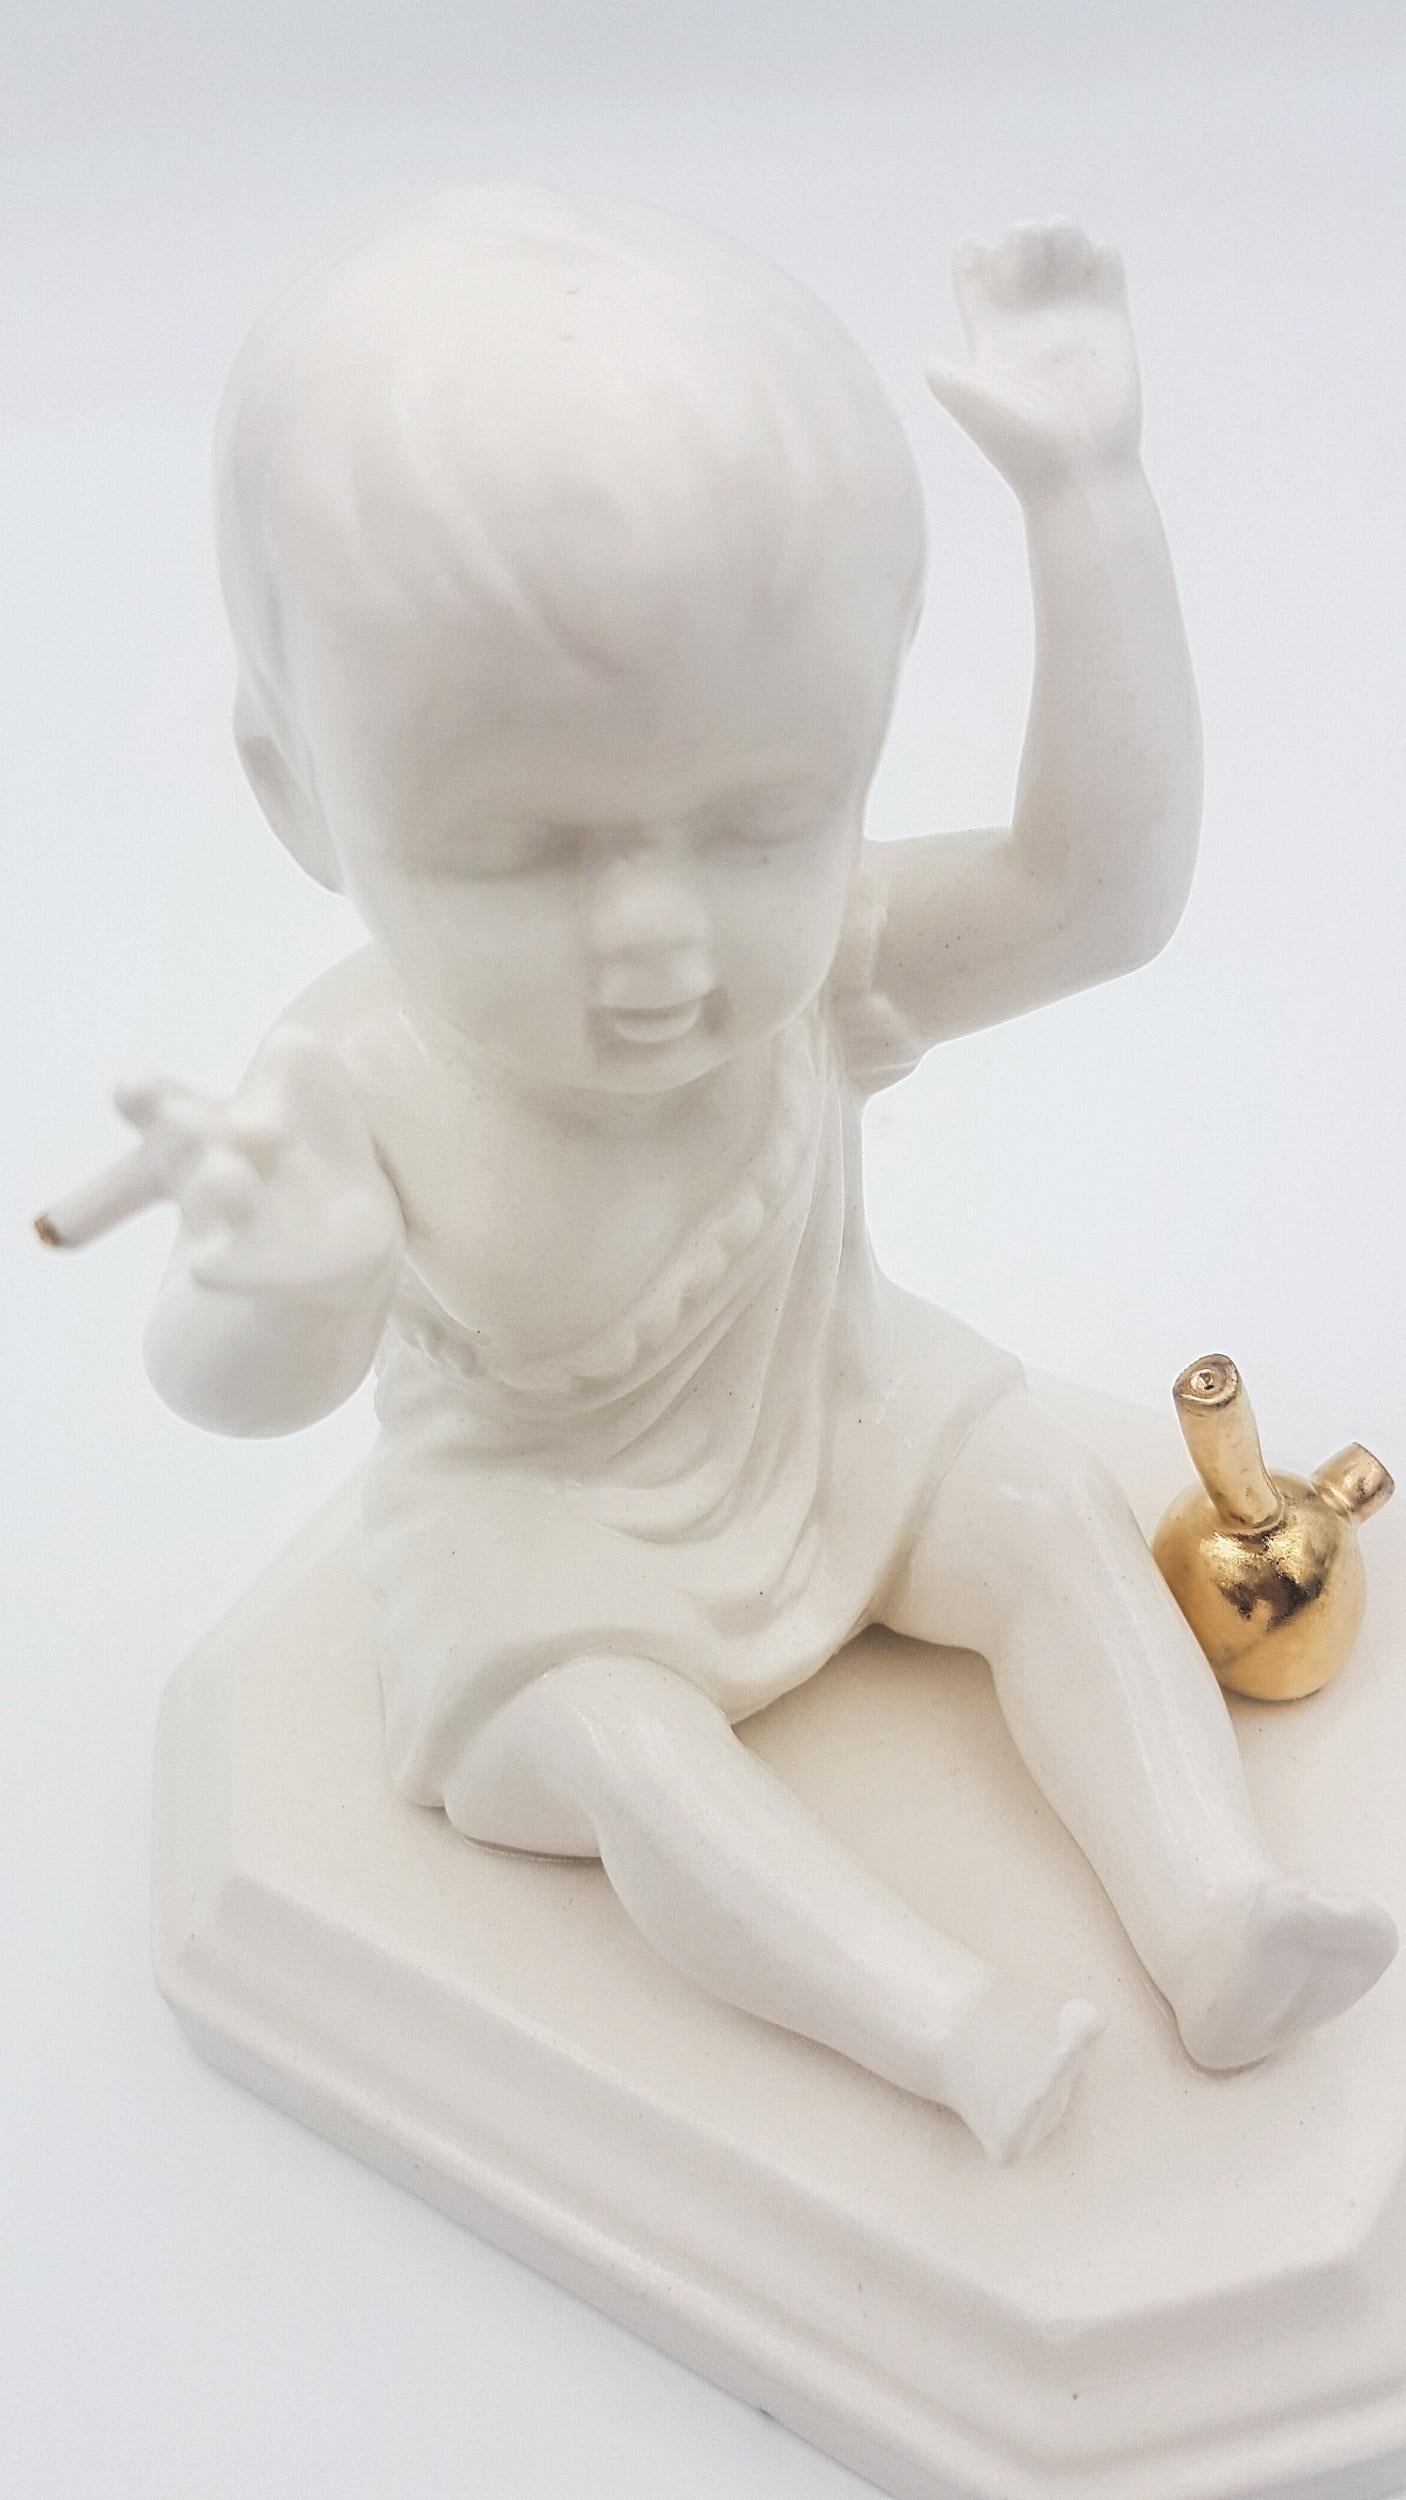 Jen Watson
Bong Baby II
Year: 2021
Medium: Porcelain, Glaze, Luster 
Size: 5 x 4.5 x 3.5 inches
Signed
Gallery COA included

About Jen Watson:

My figurines exist somewhere between relic and homage, honoring the tradition of the figurine and